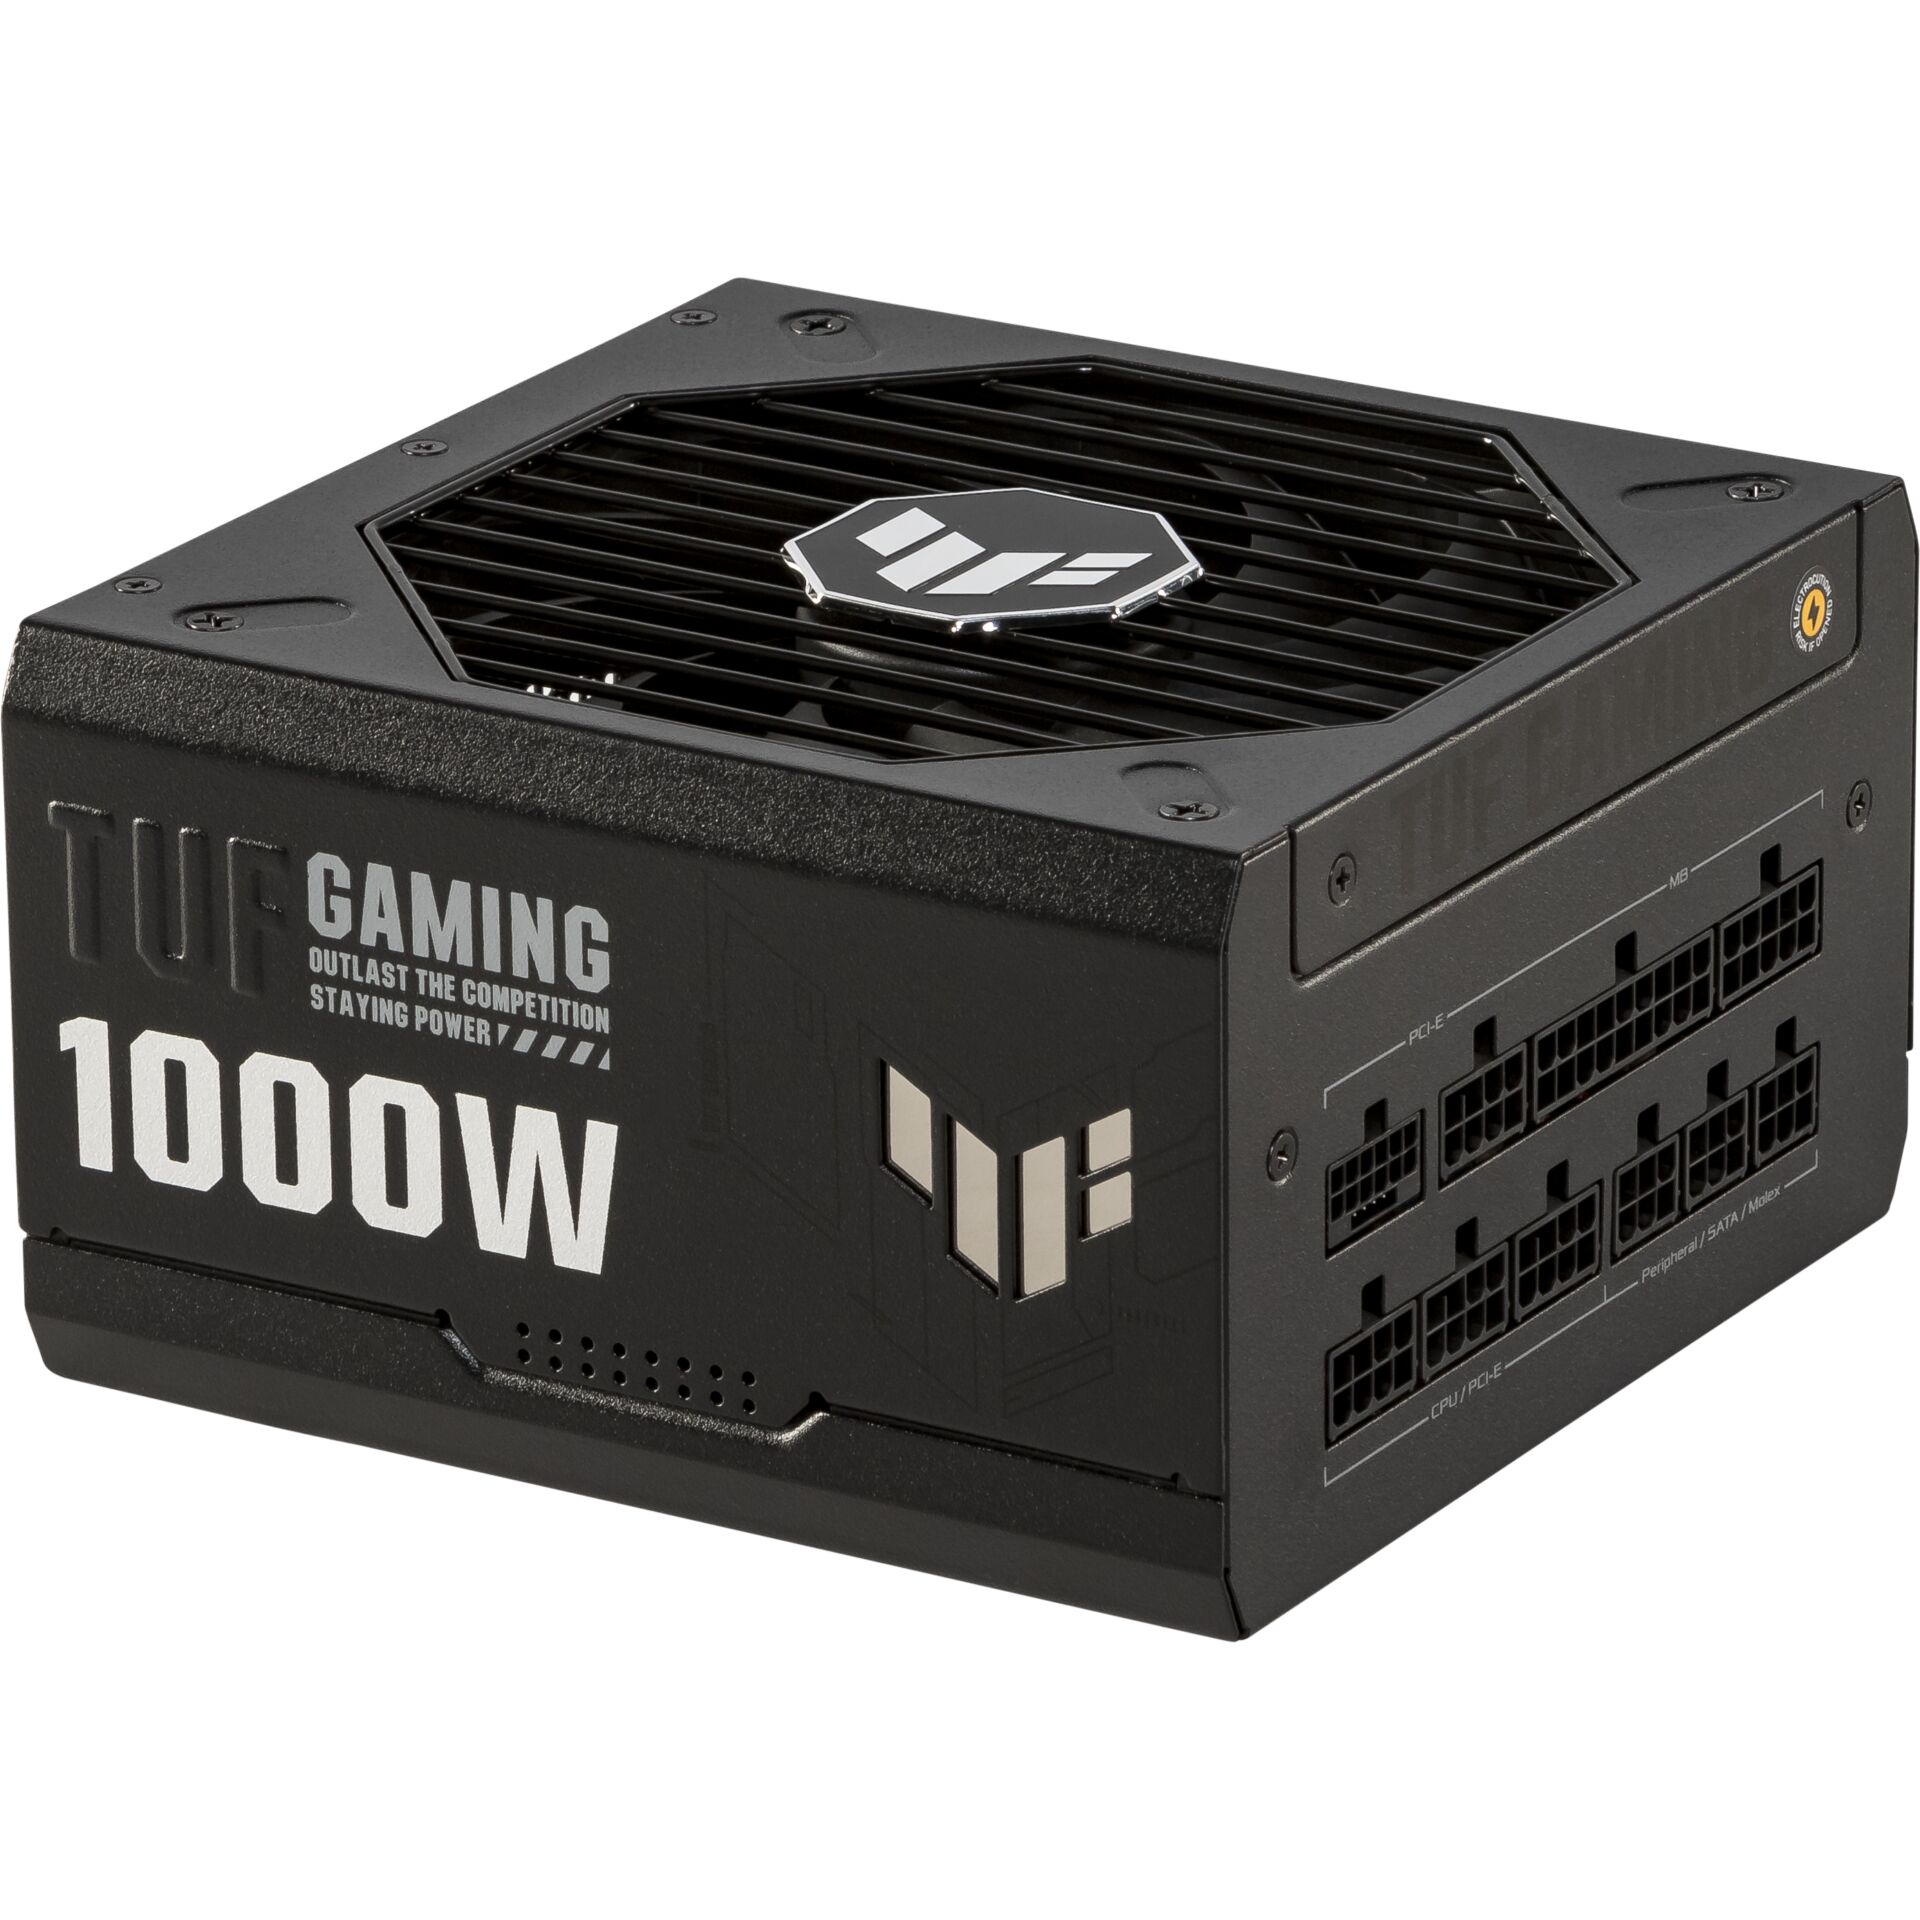 Asus Aliment. TUF Gaming 1000W oro